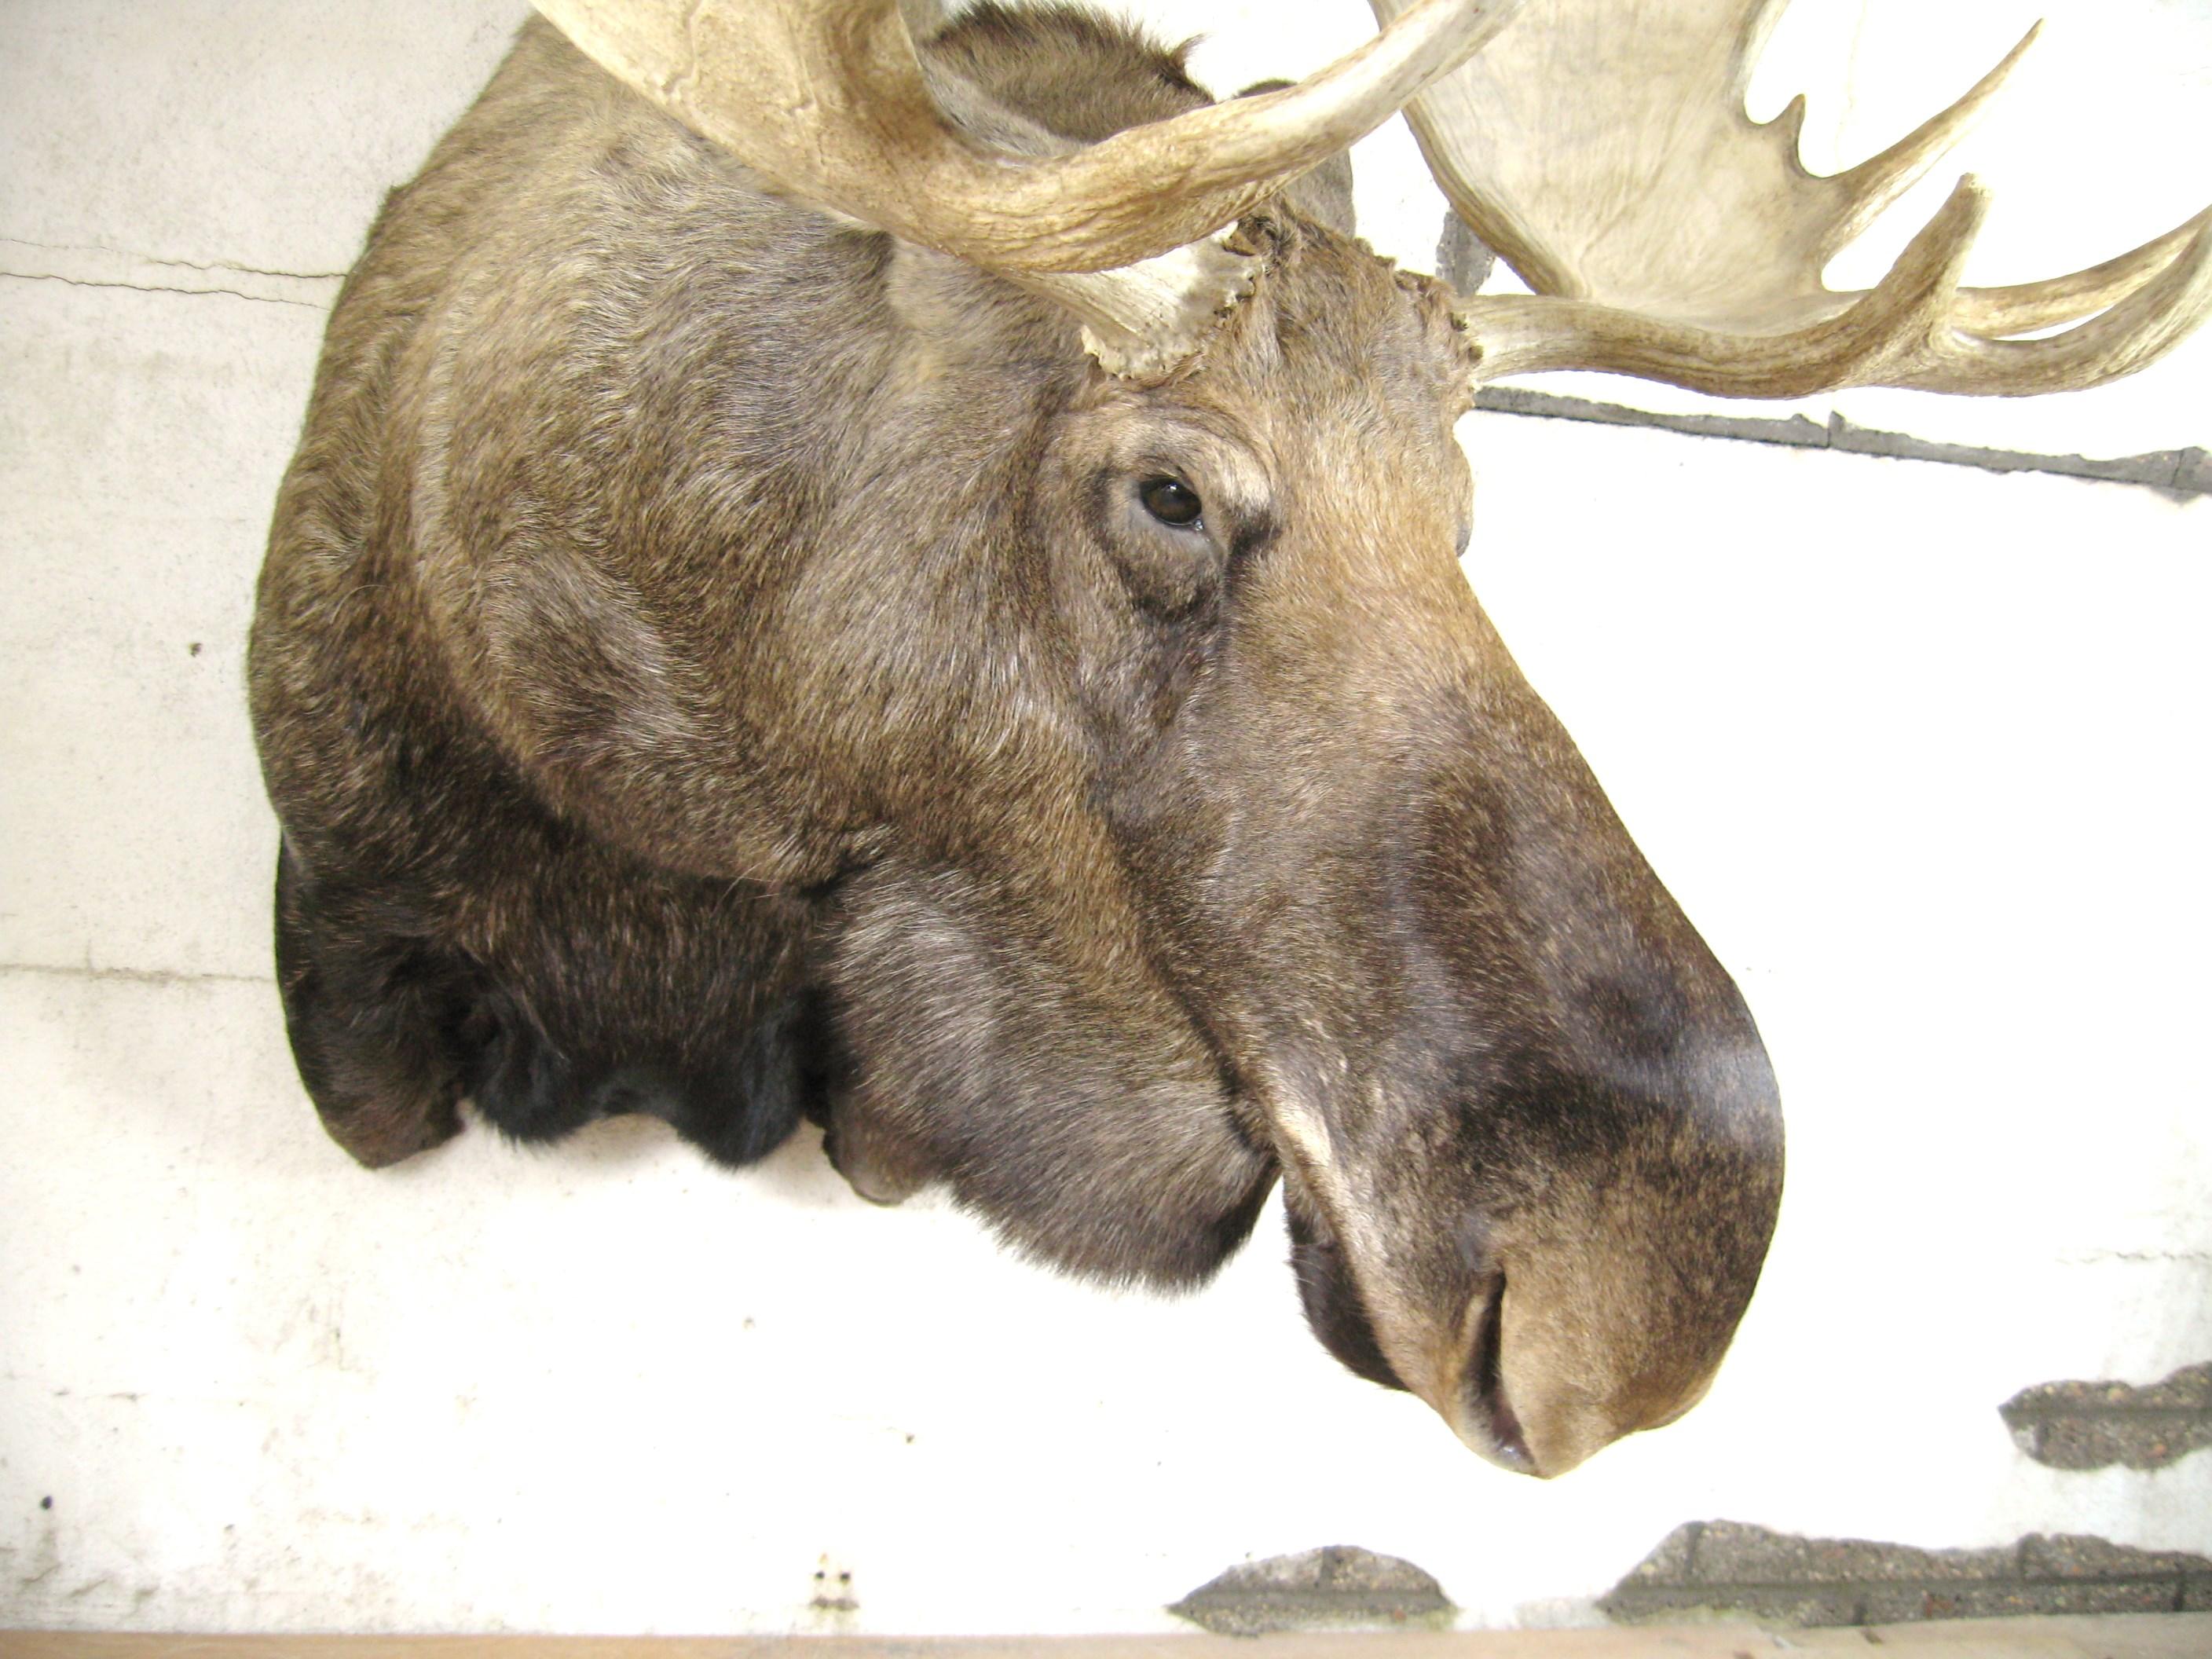 Stunning bull noose professionally done by Jonas Brothers. This is a more than a shoulder mount. Excellent professional Taxidermy. Since 1908, Jonas Brothers Taxidermy has represented the highest quality and artistry in the taxidermy industry.